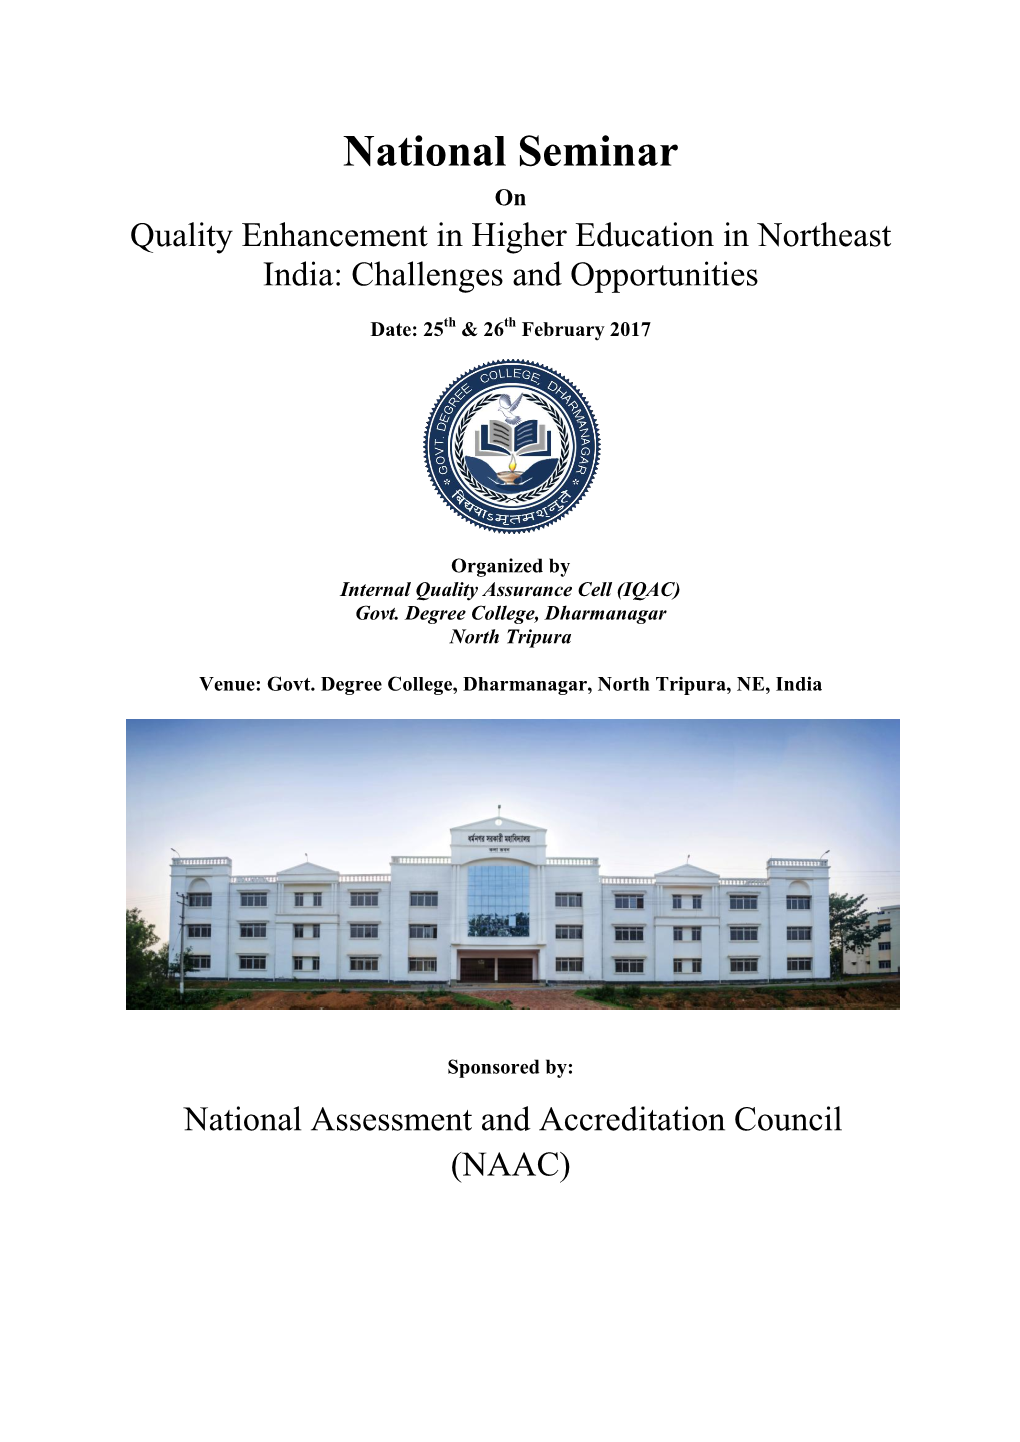 National Seminar on Quality Enhancement in Higher Education in Northeast India: Challenges and Opportunities